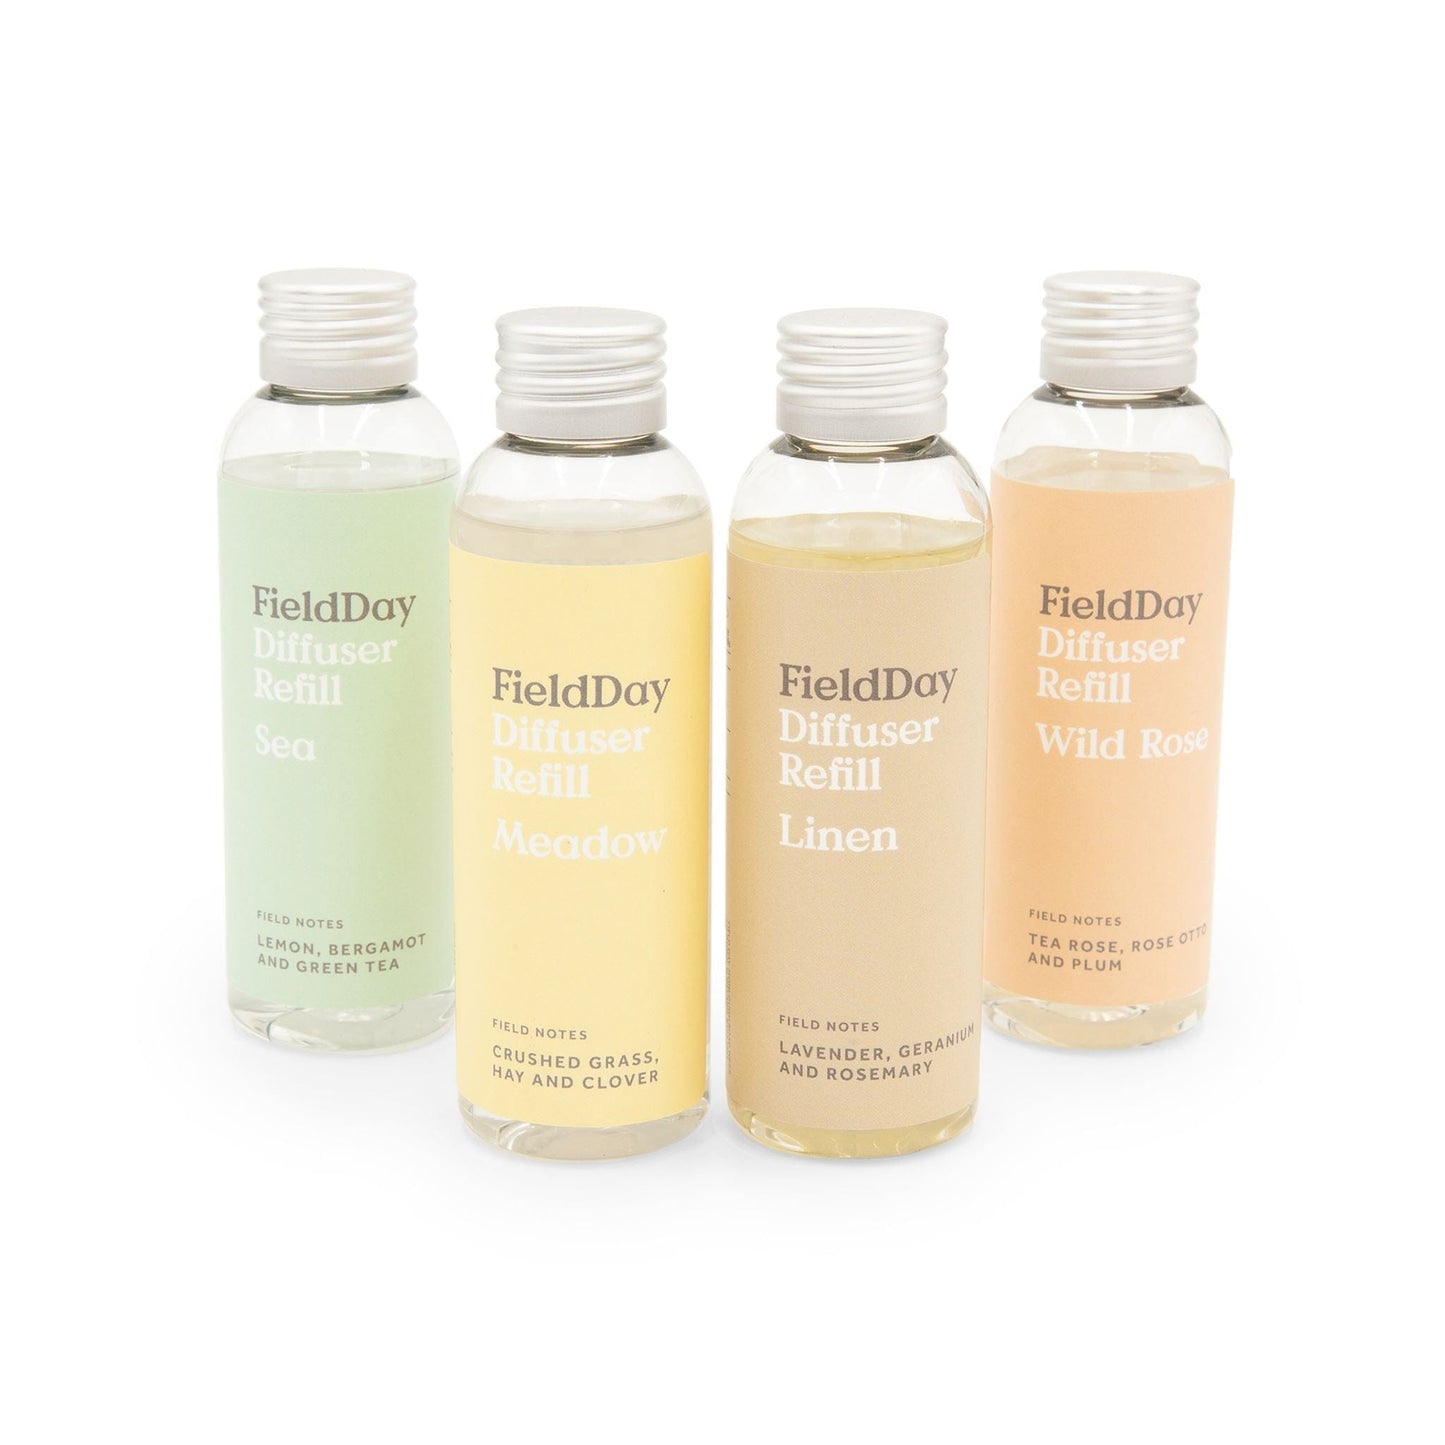 FieldDay Home Fragrance FieldDay Classic Collection Diffuser Refill 100ml - Meadow